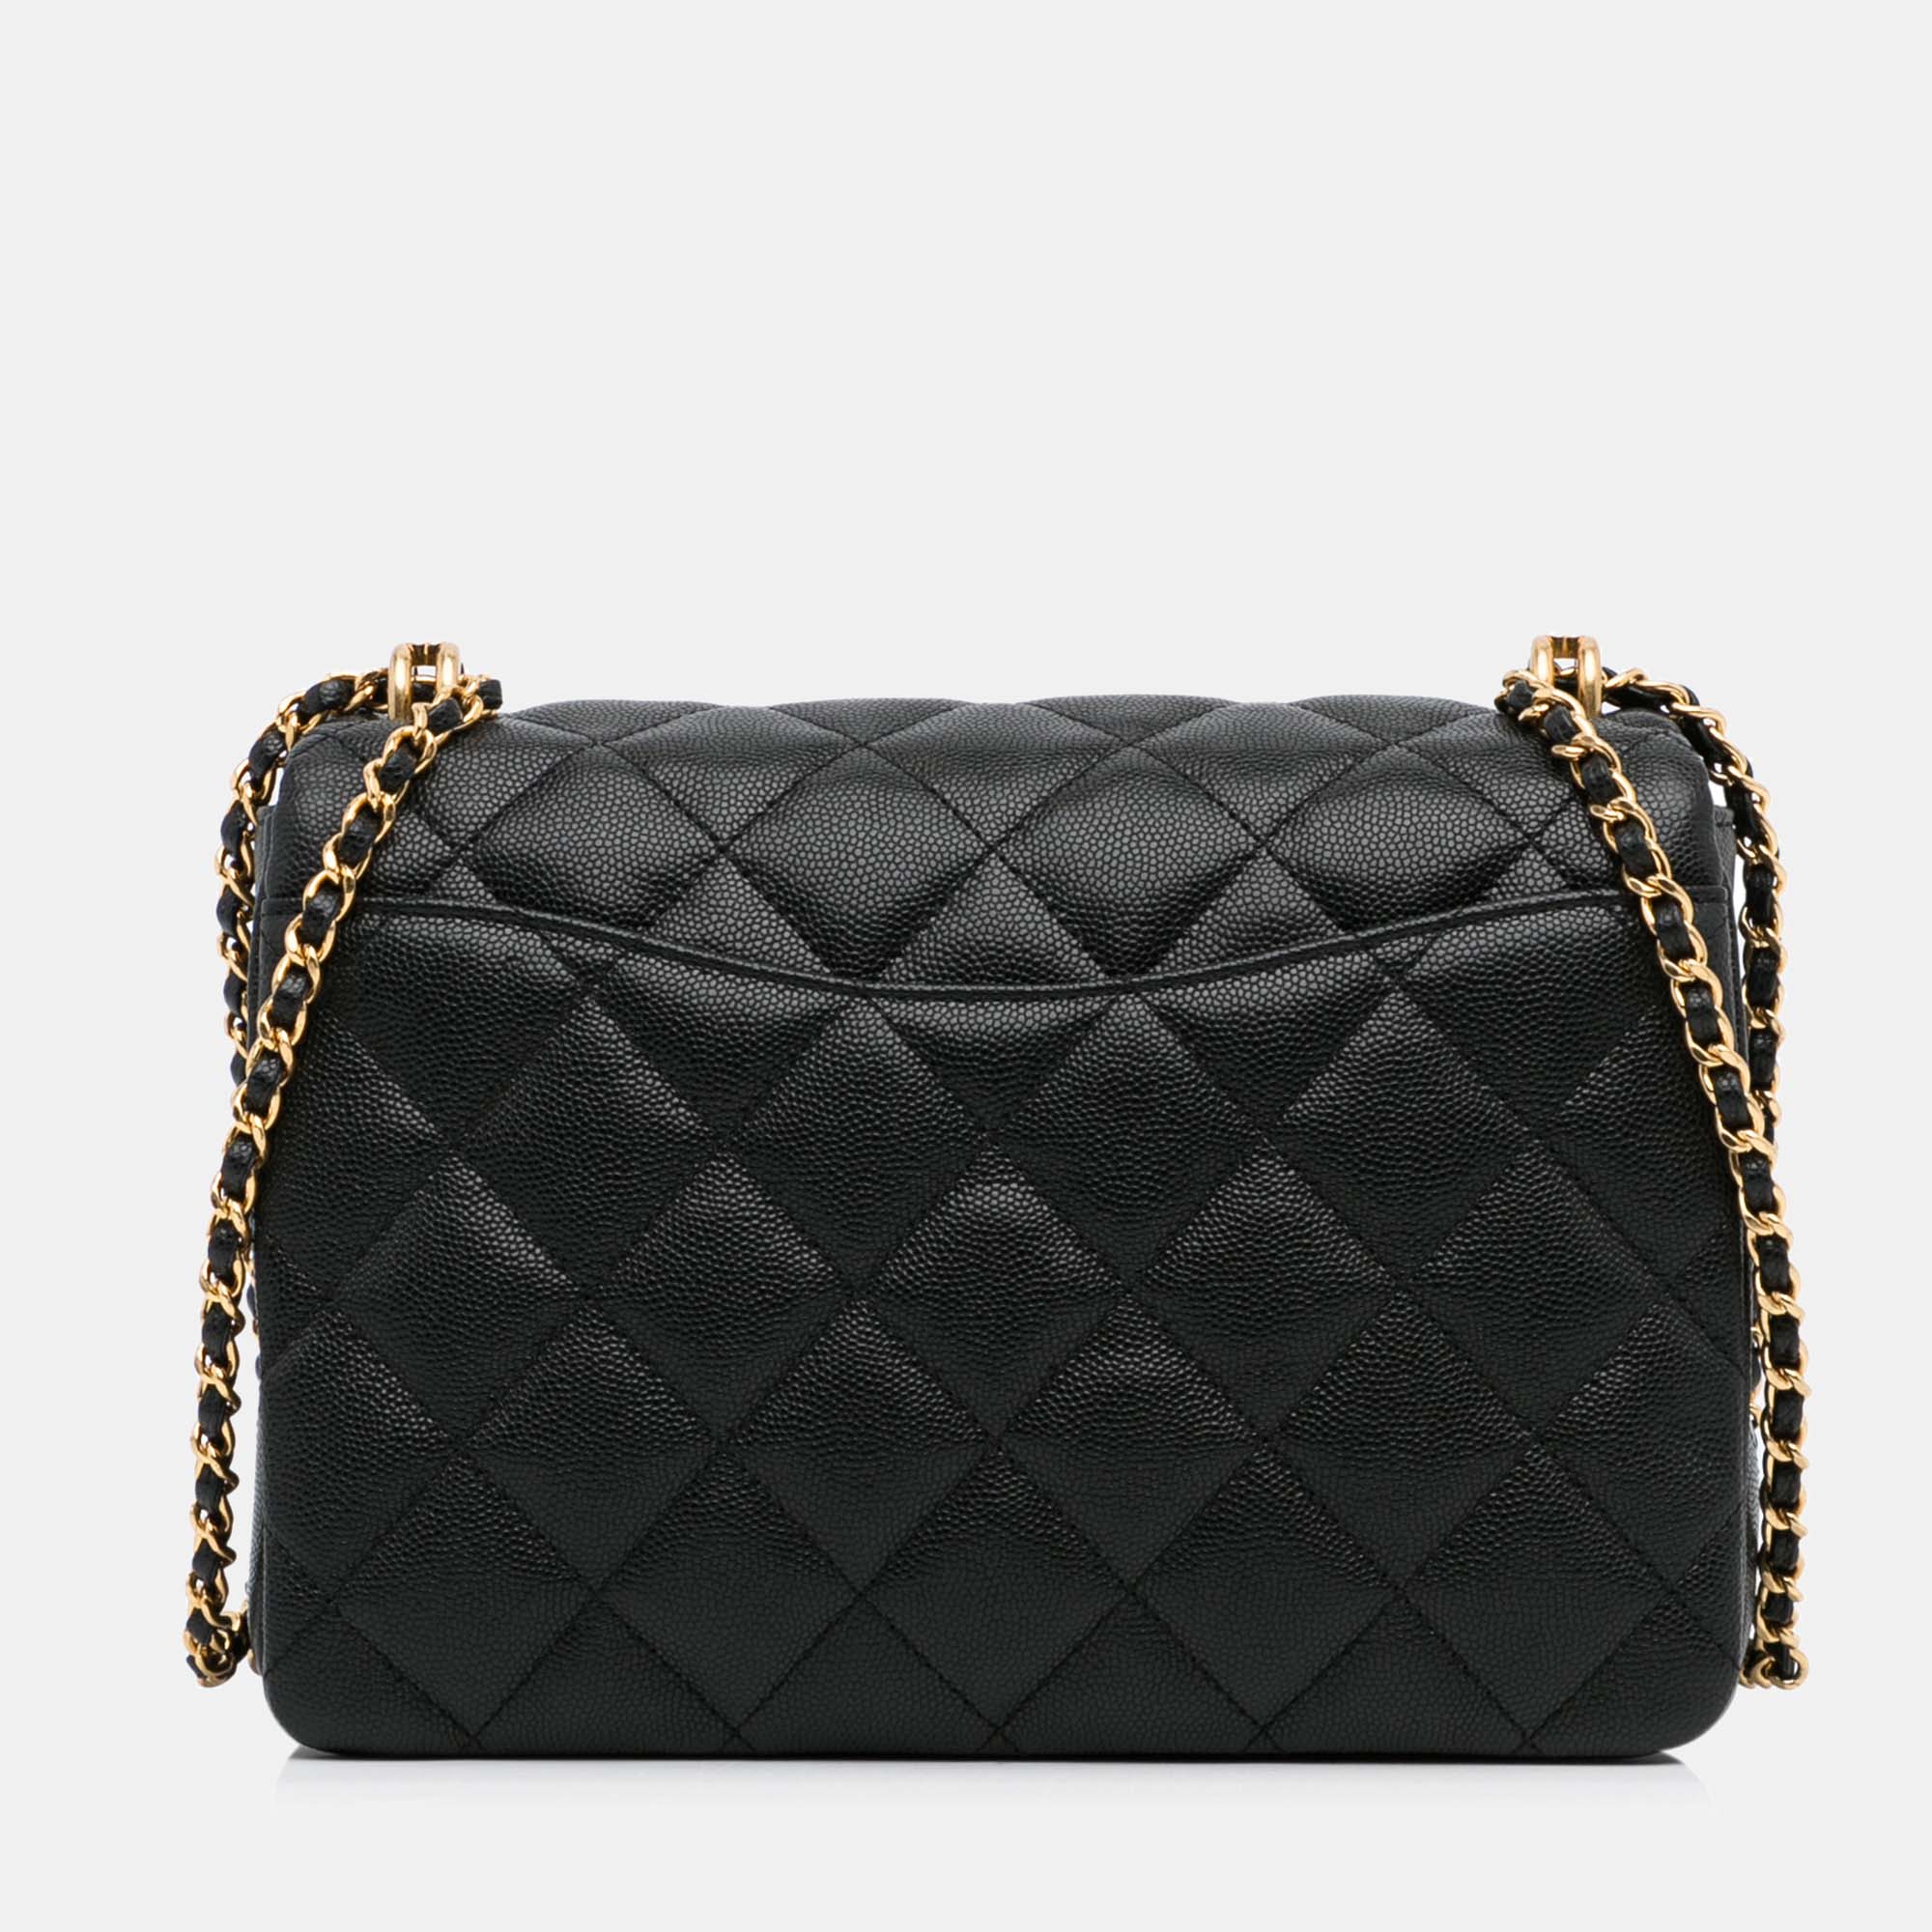 Chanel Coco First Flap Bag